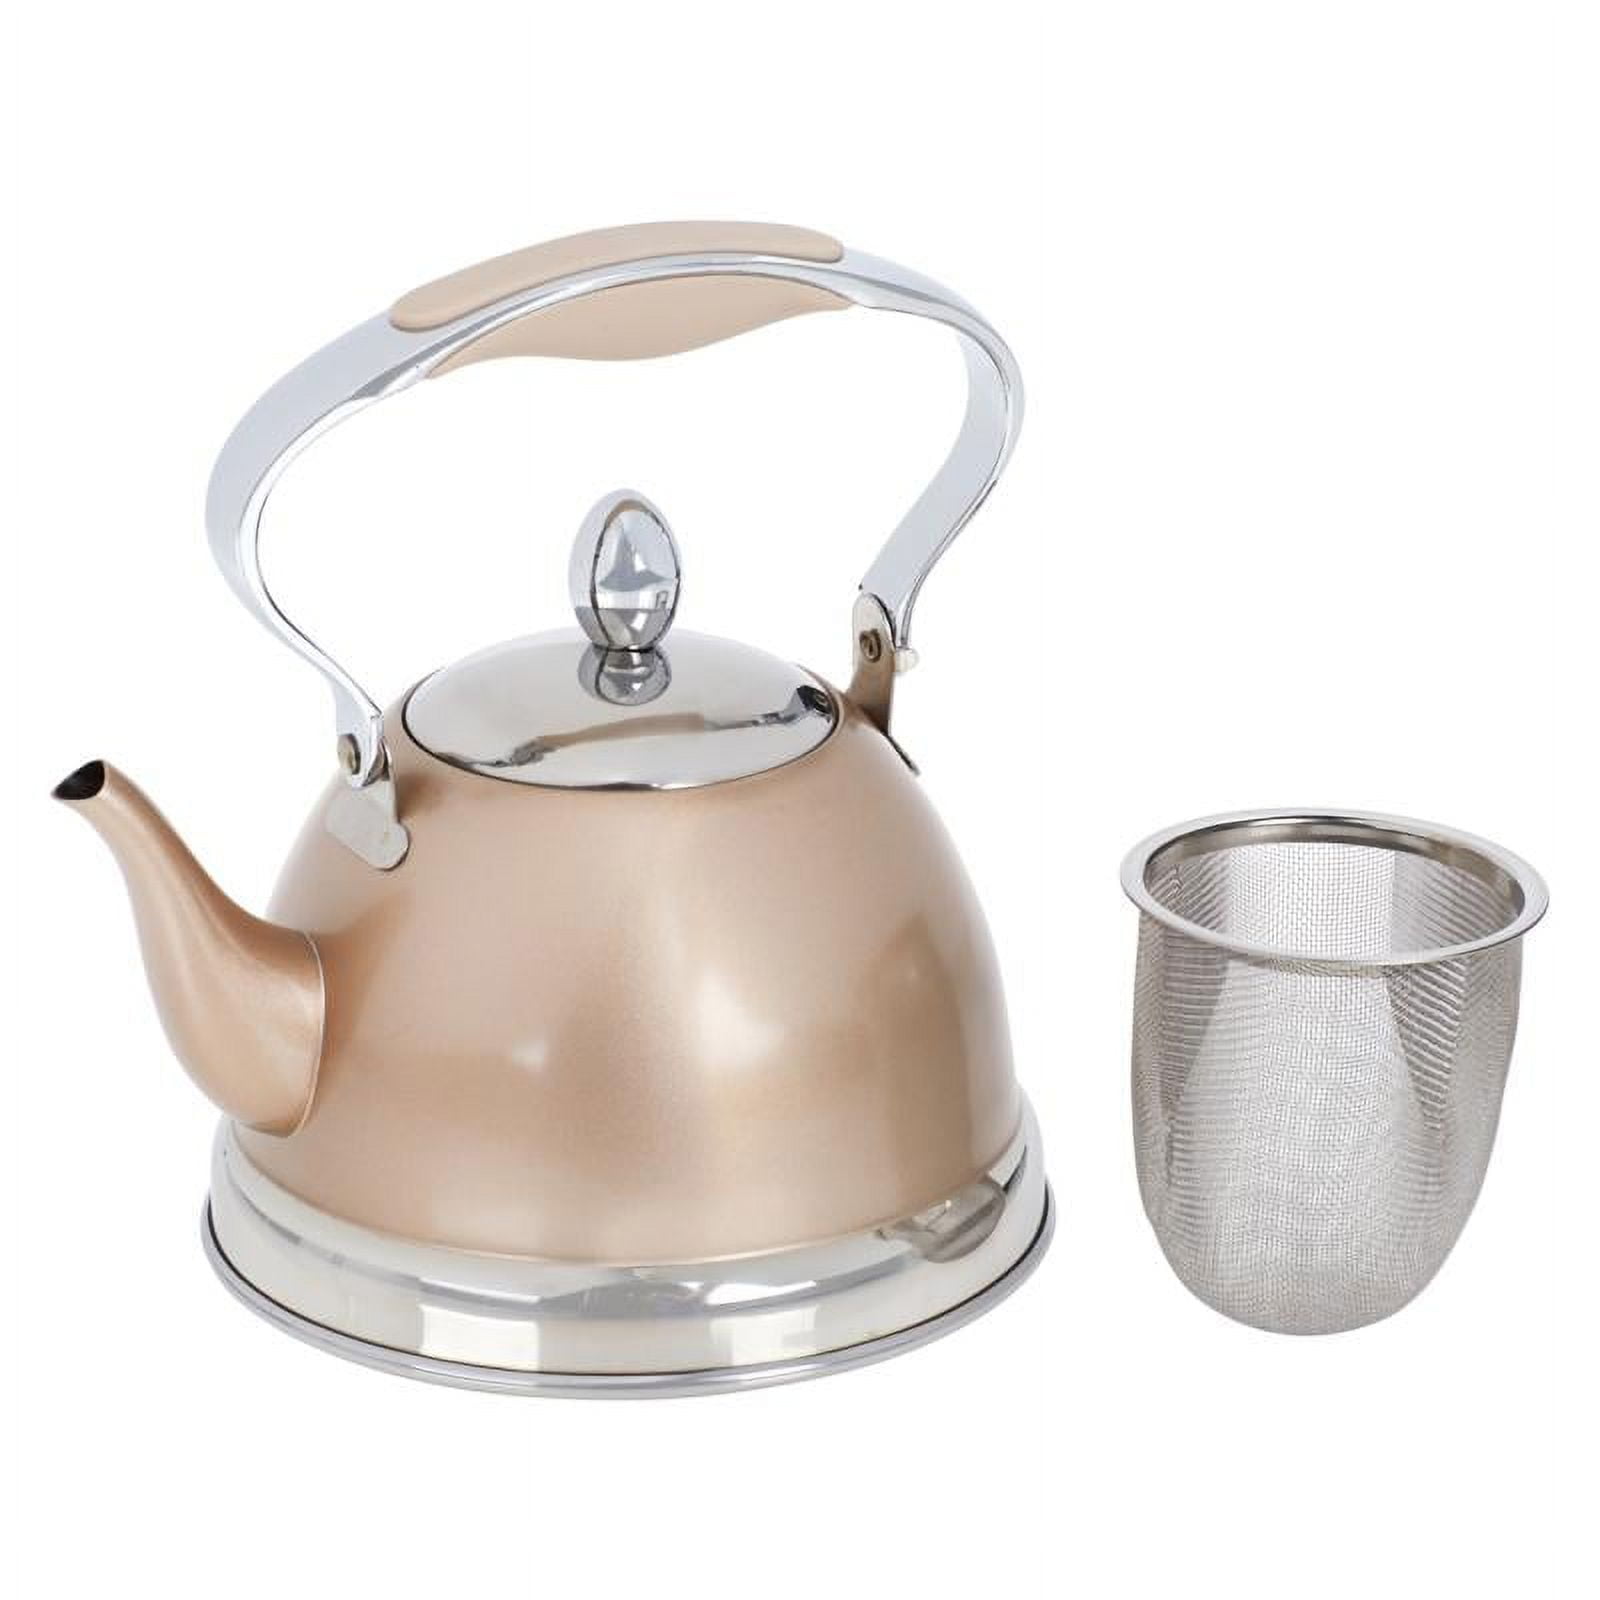 Mgaxyff Classical 1.5L Stainless Steel Teapot Electric Teakettle